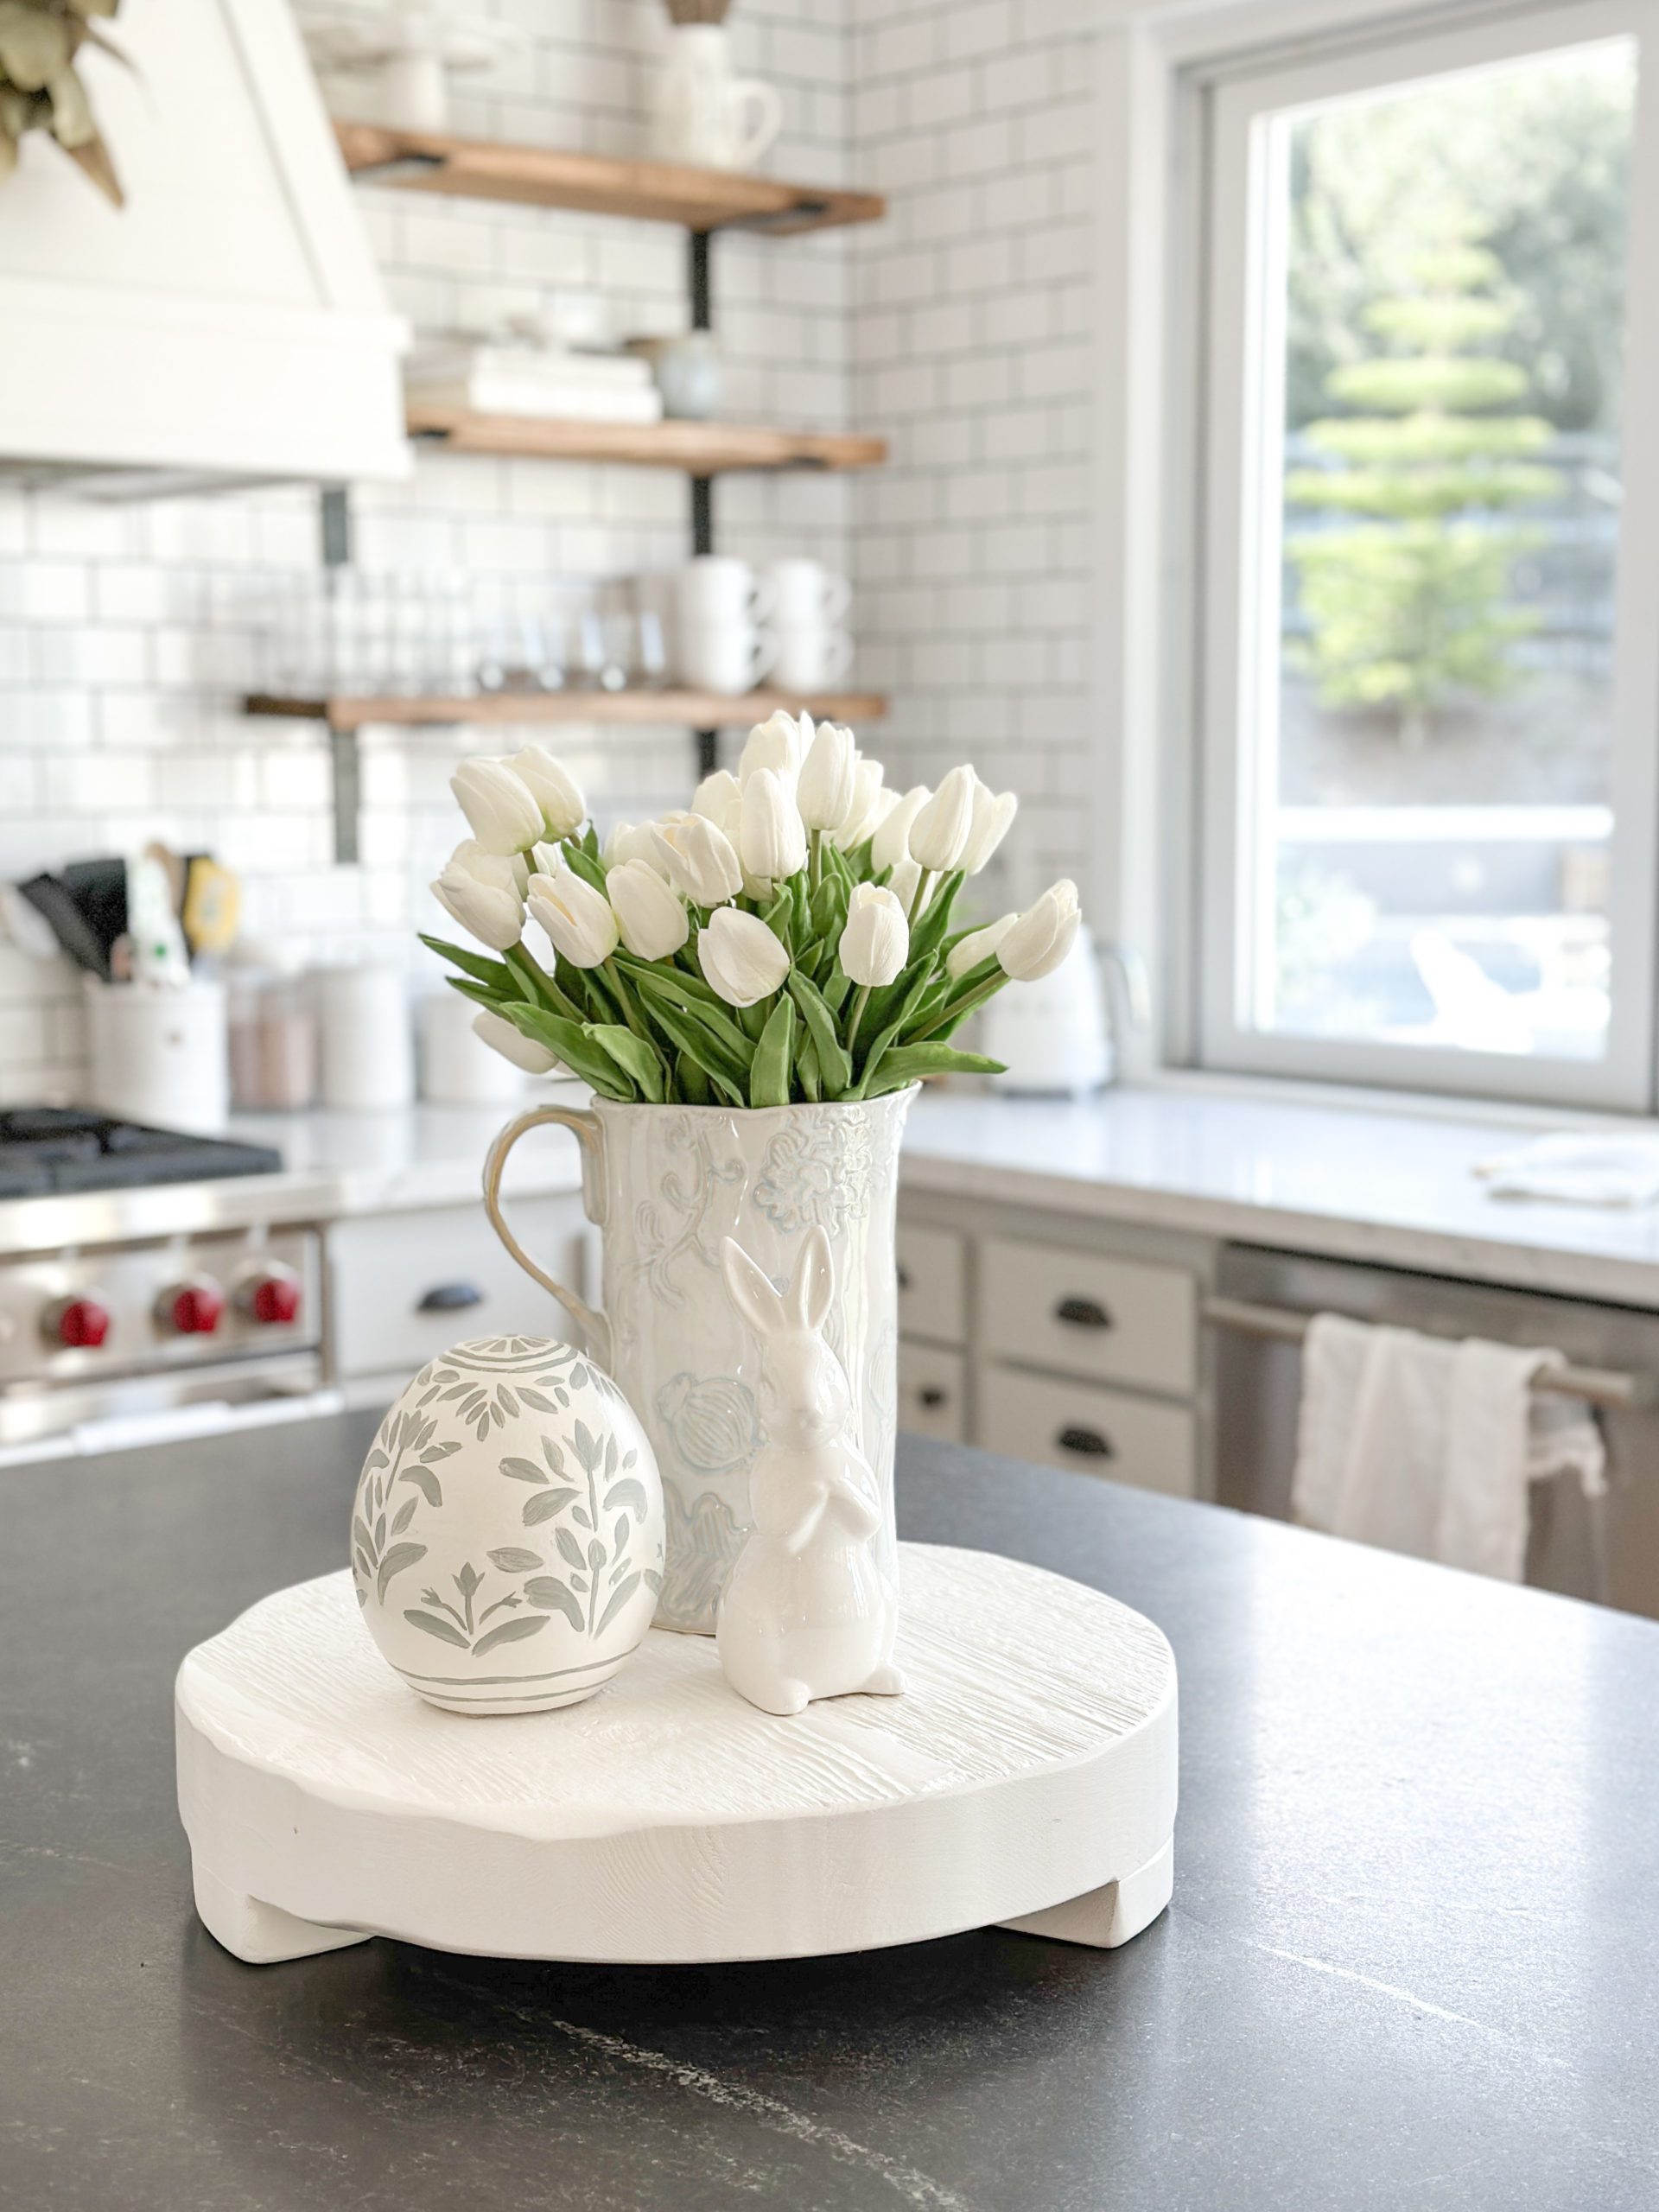 How to Use Easter Bunny Decor in a Classy Way - Pasha is Home